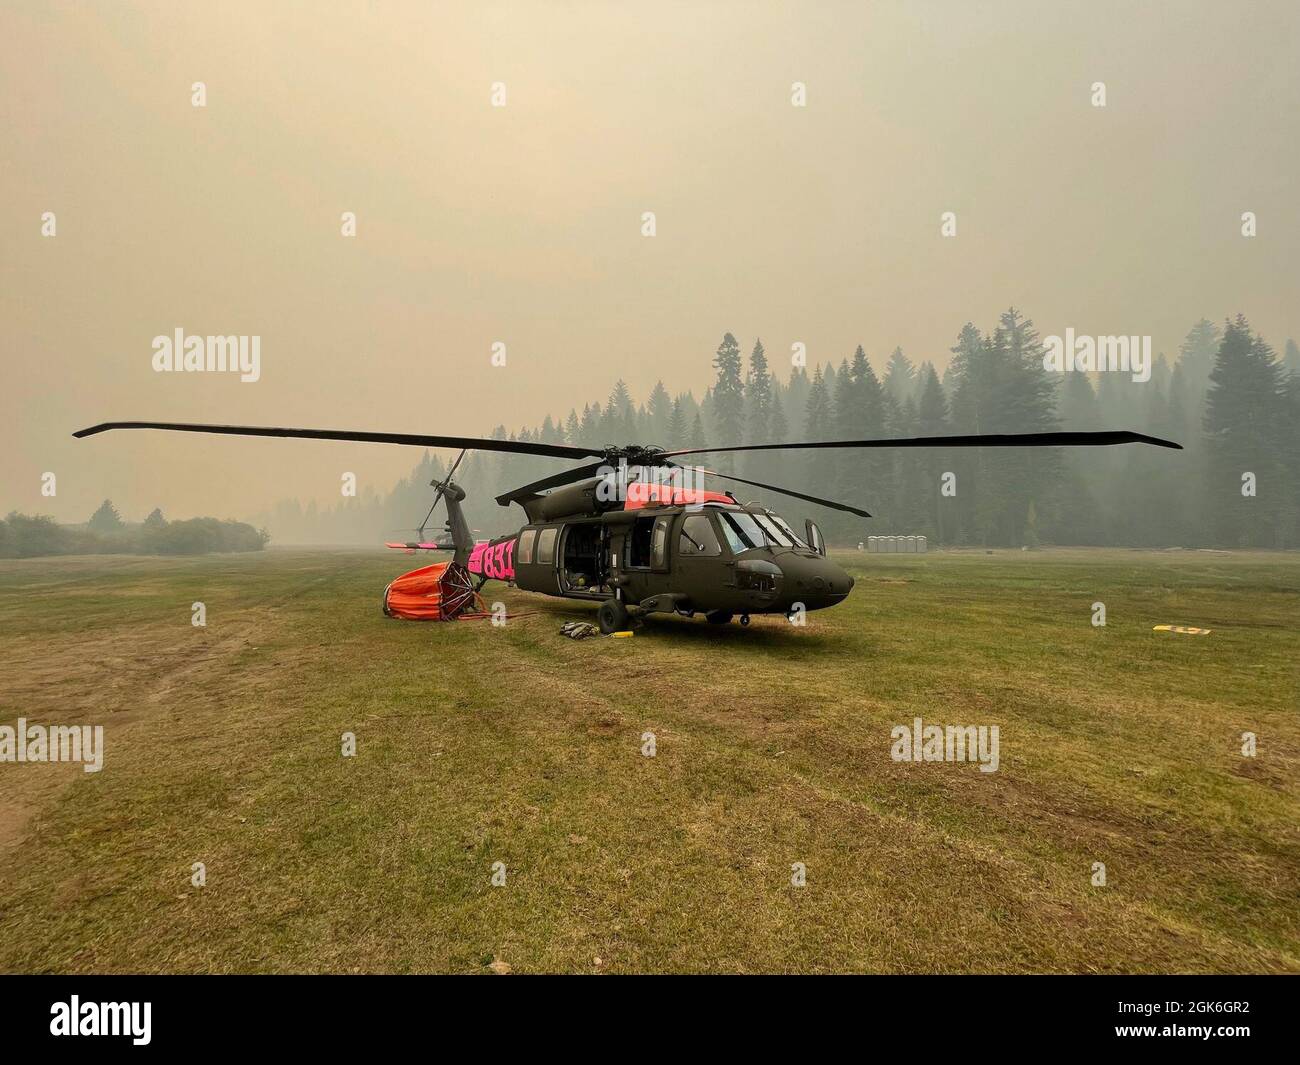 A U.S. Army UH-60 Black Hawk helicopter flown by the California Army National Guard is positioned at the Battle Creek helibase near Mineral, California, Aug. 17, 2021, while fighting the Dixie Fire. The fire eclipsed 600,000 acres and is currently the second-largest fire in California’s recorded history. Stock Photo